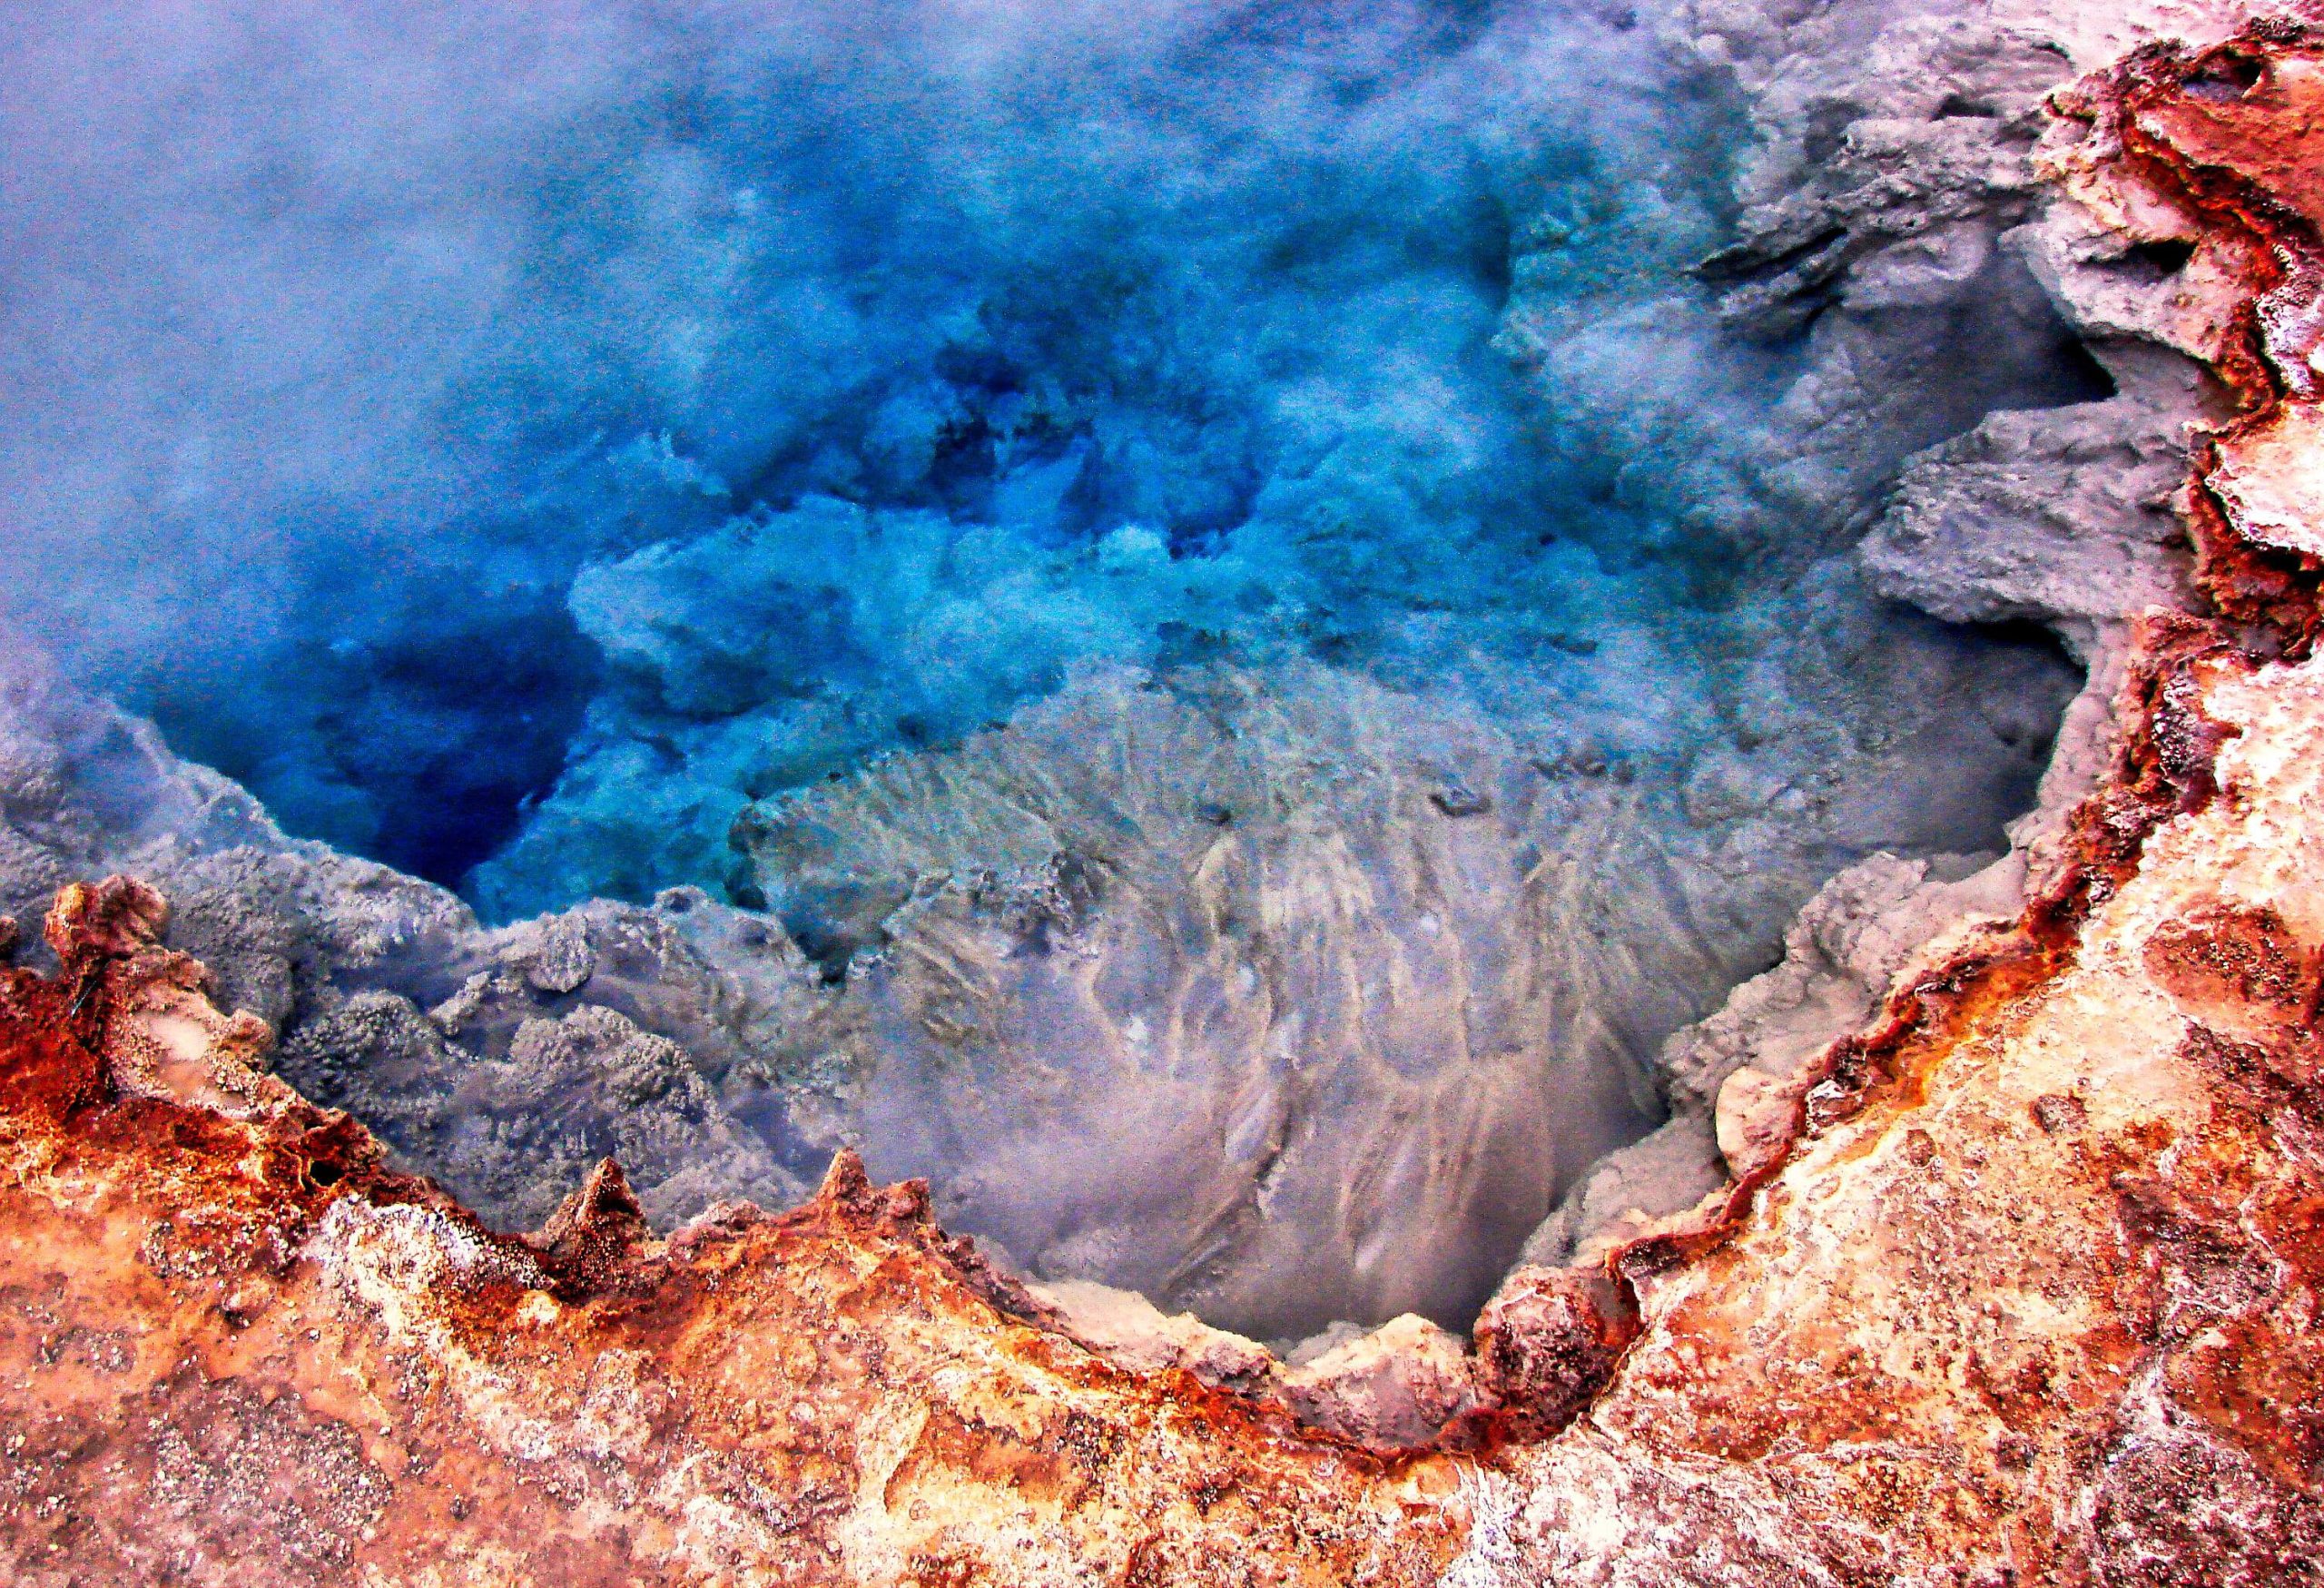 A mesmerising geyser with crystalline turquoise steamy water.